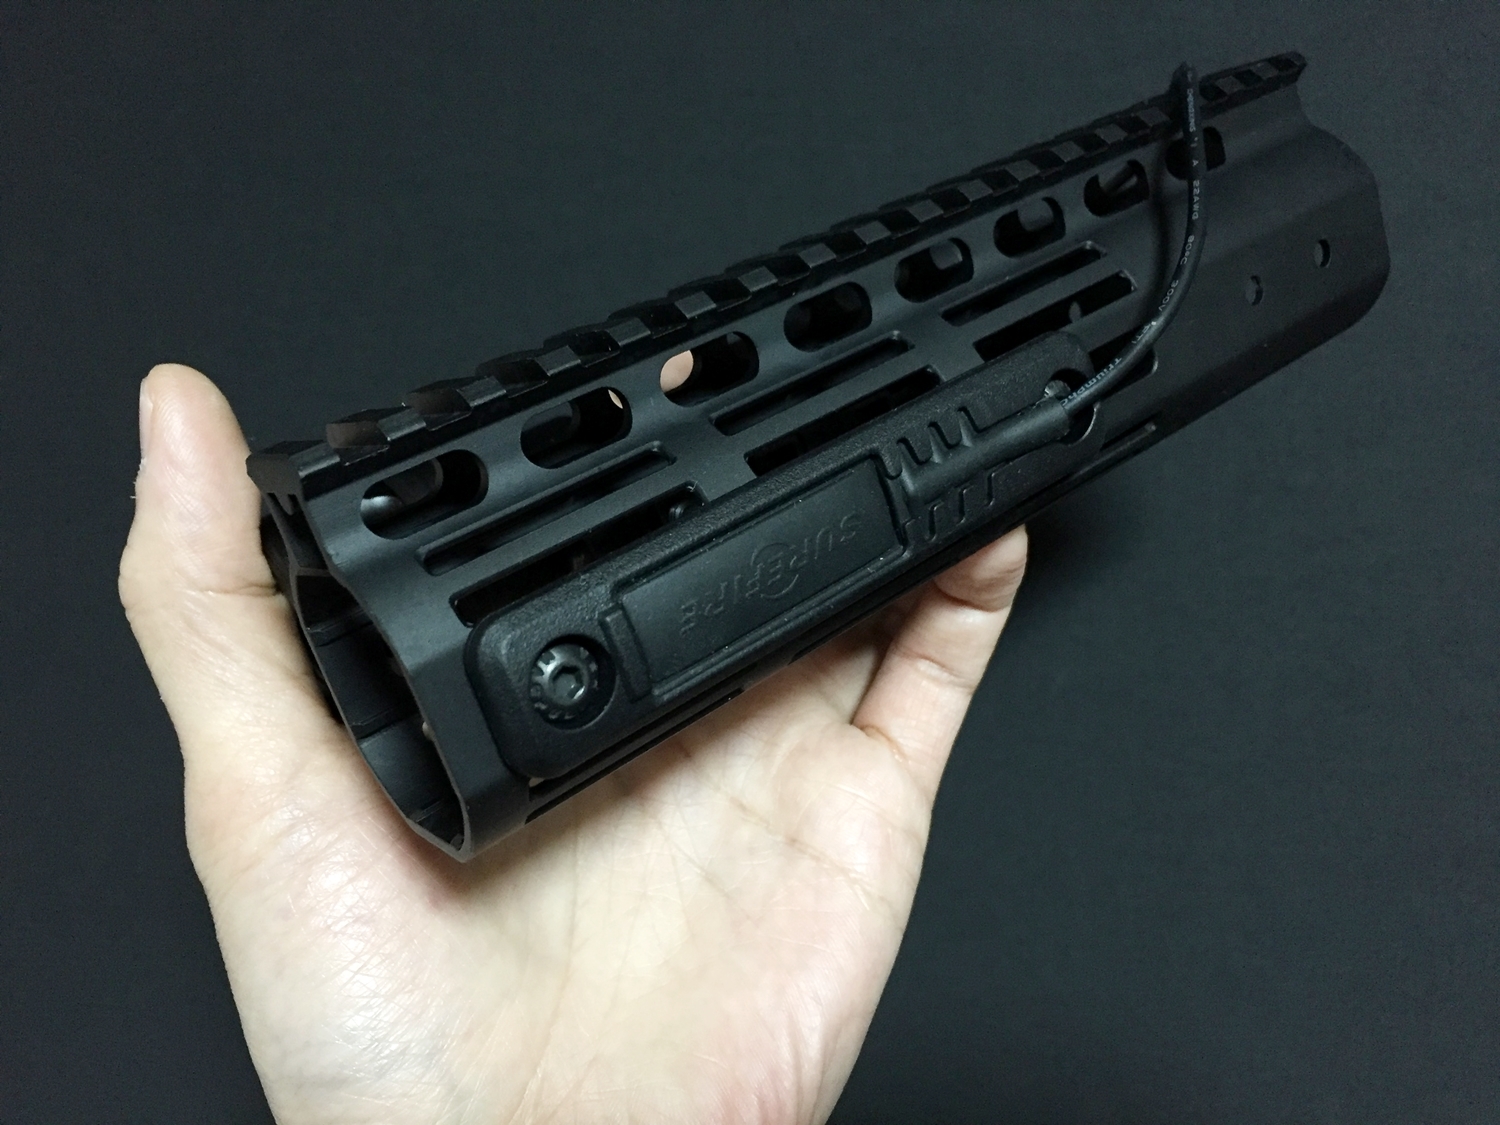 23 M-LOK MAGPUL Tape Switch Mounting Plate for Surefire ST Polymer MADE IN USA マグプル 実物 本家 テープ リモート スイッチ